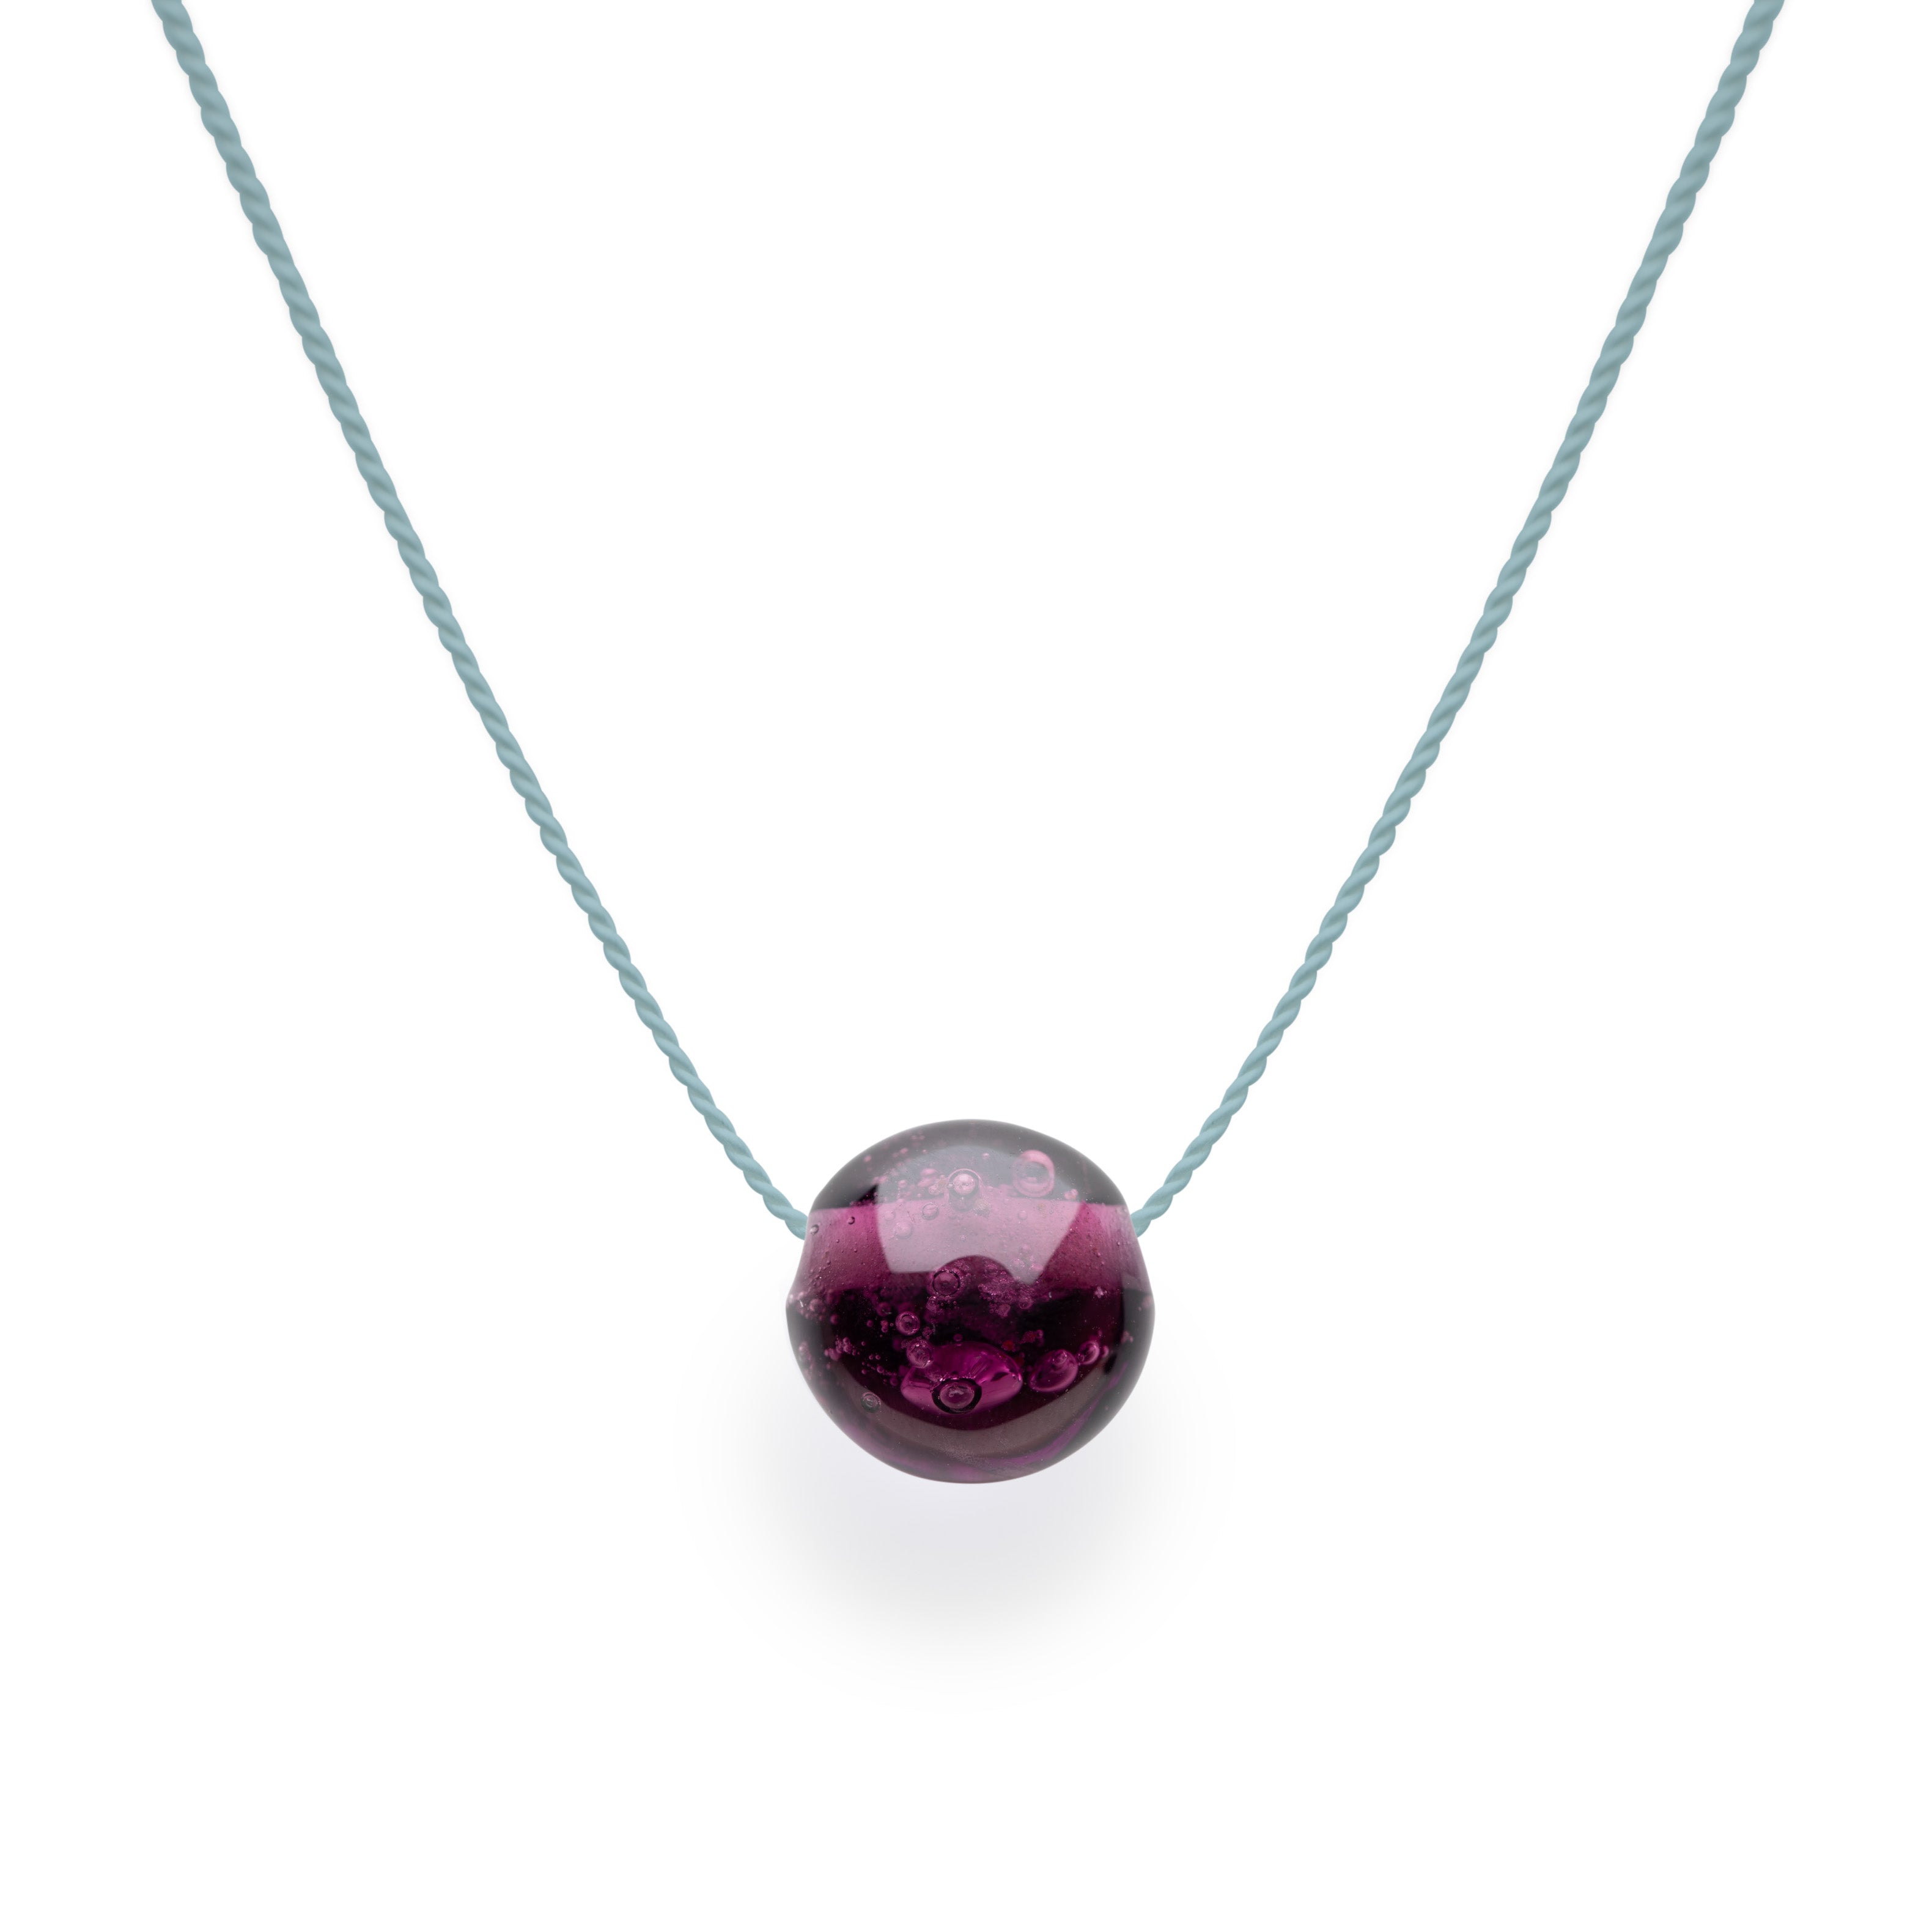 Sand Pebble Necklace - Berry